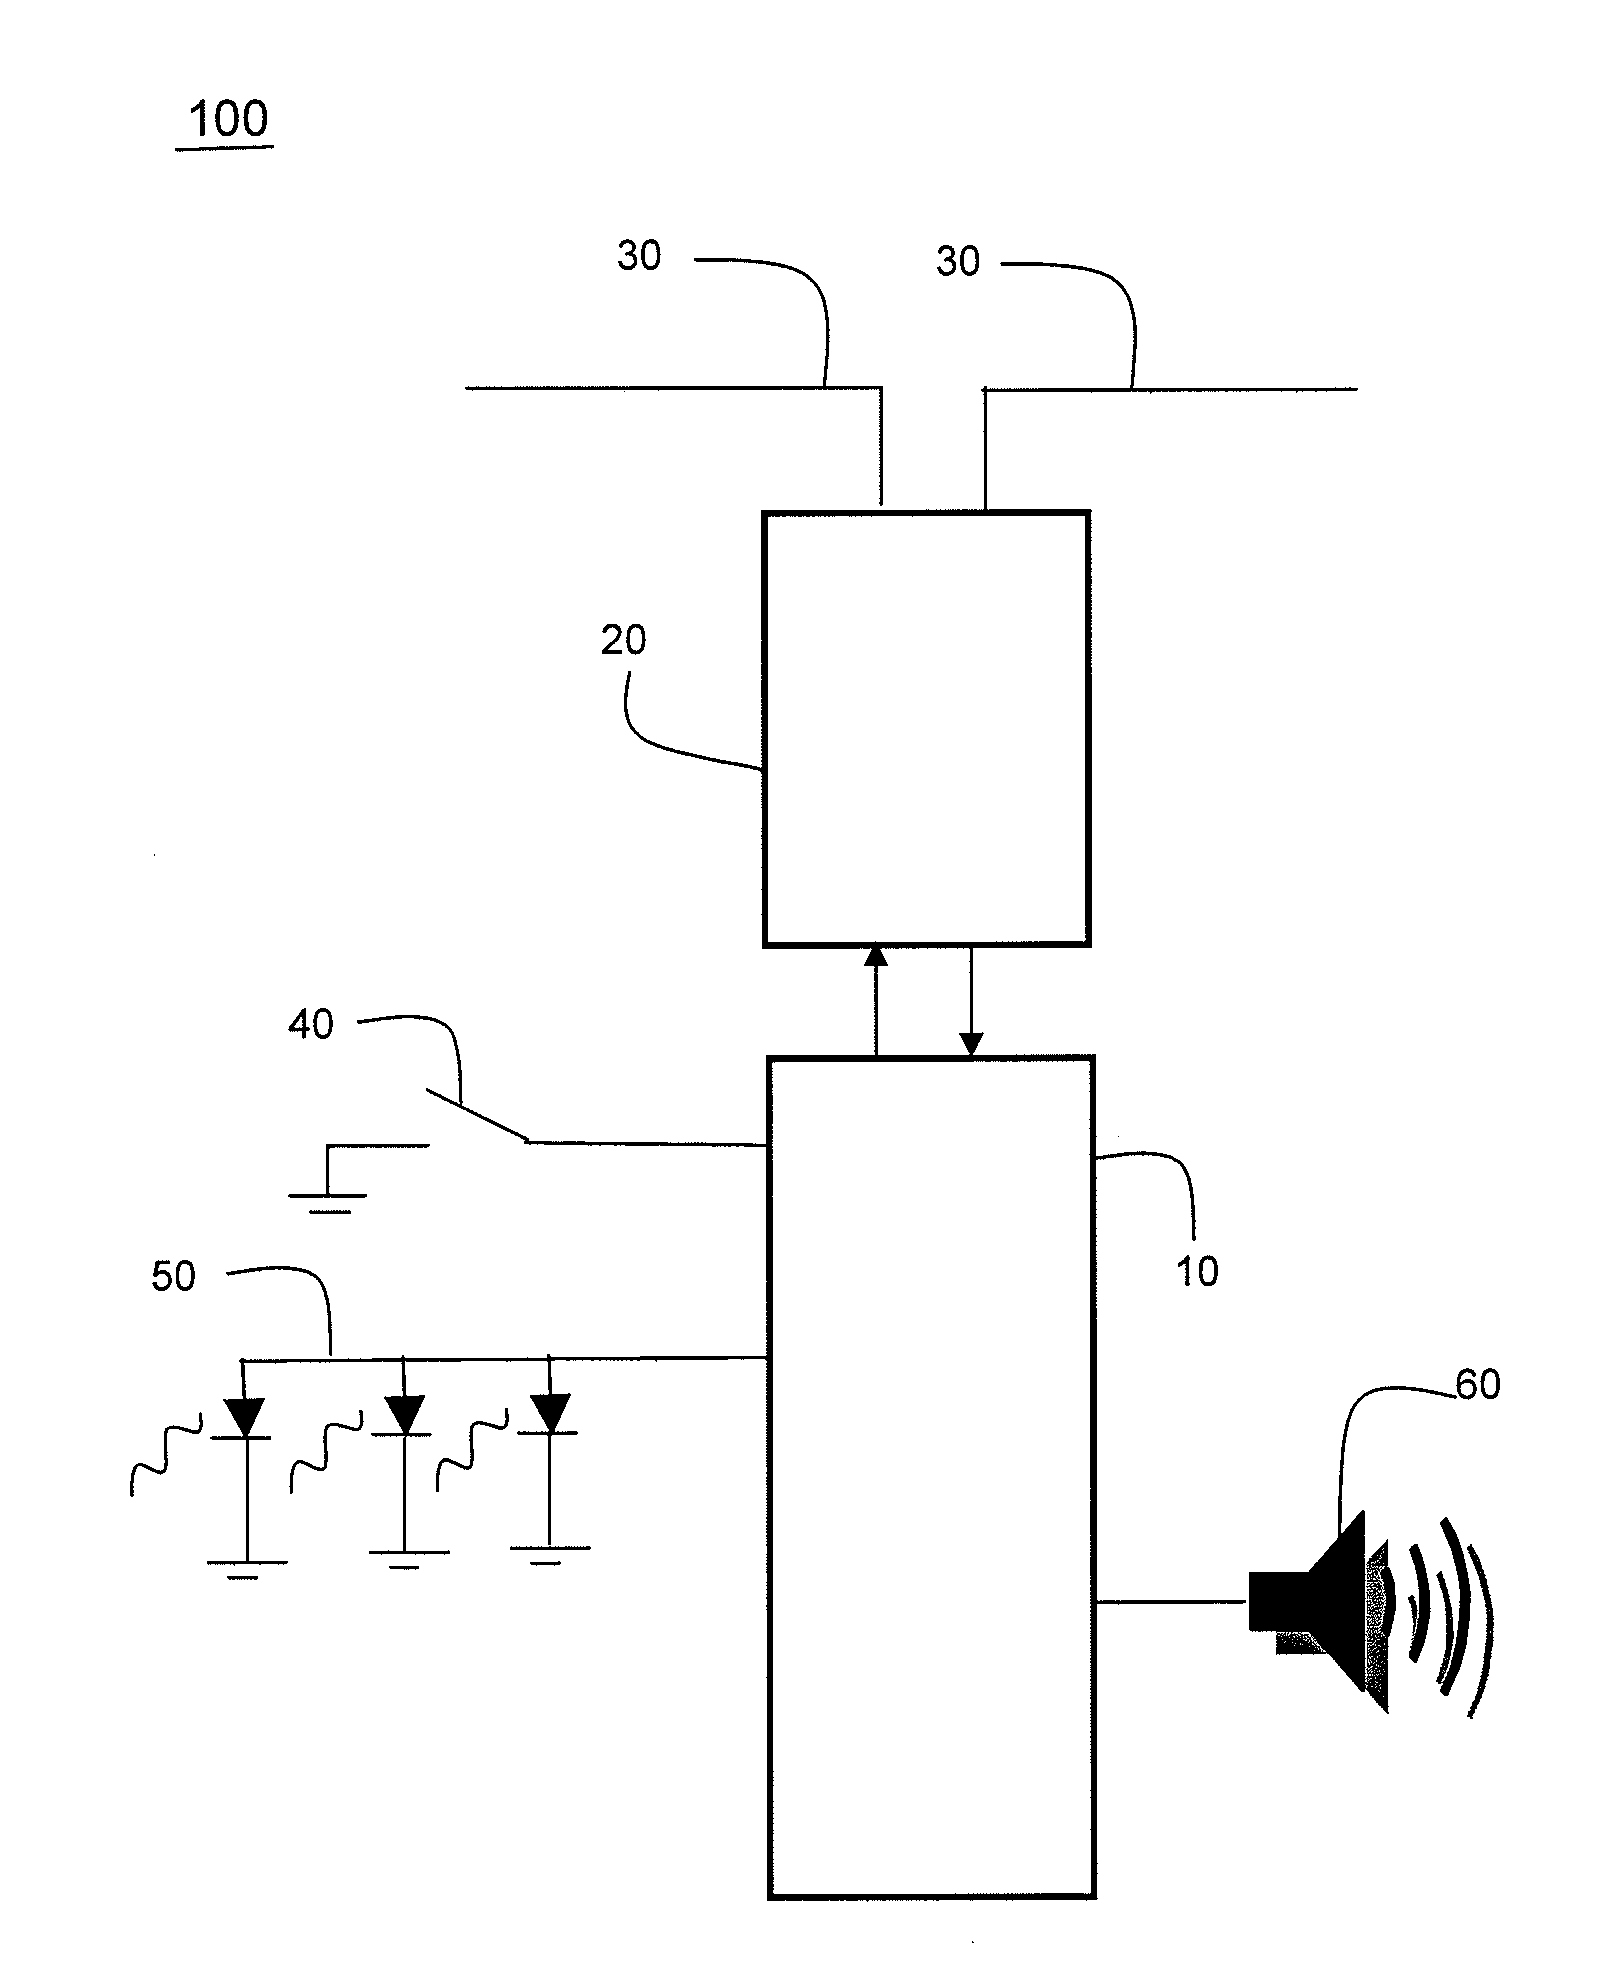 RFID vehicle tag with manually adjustable data fields